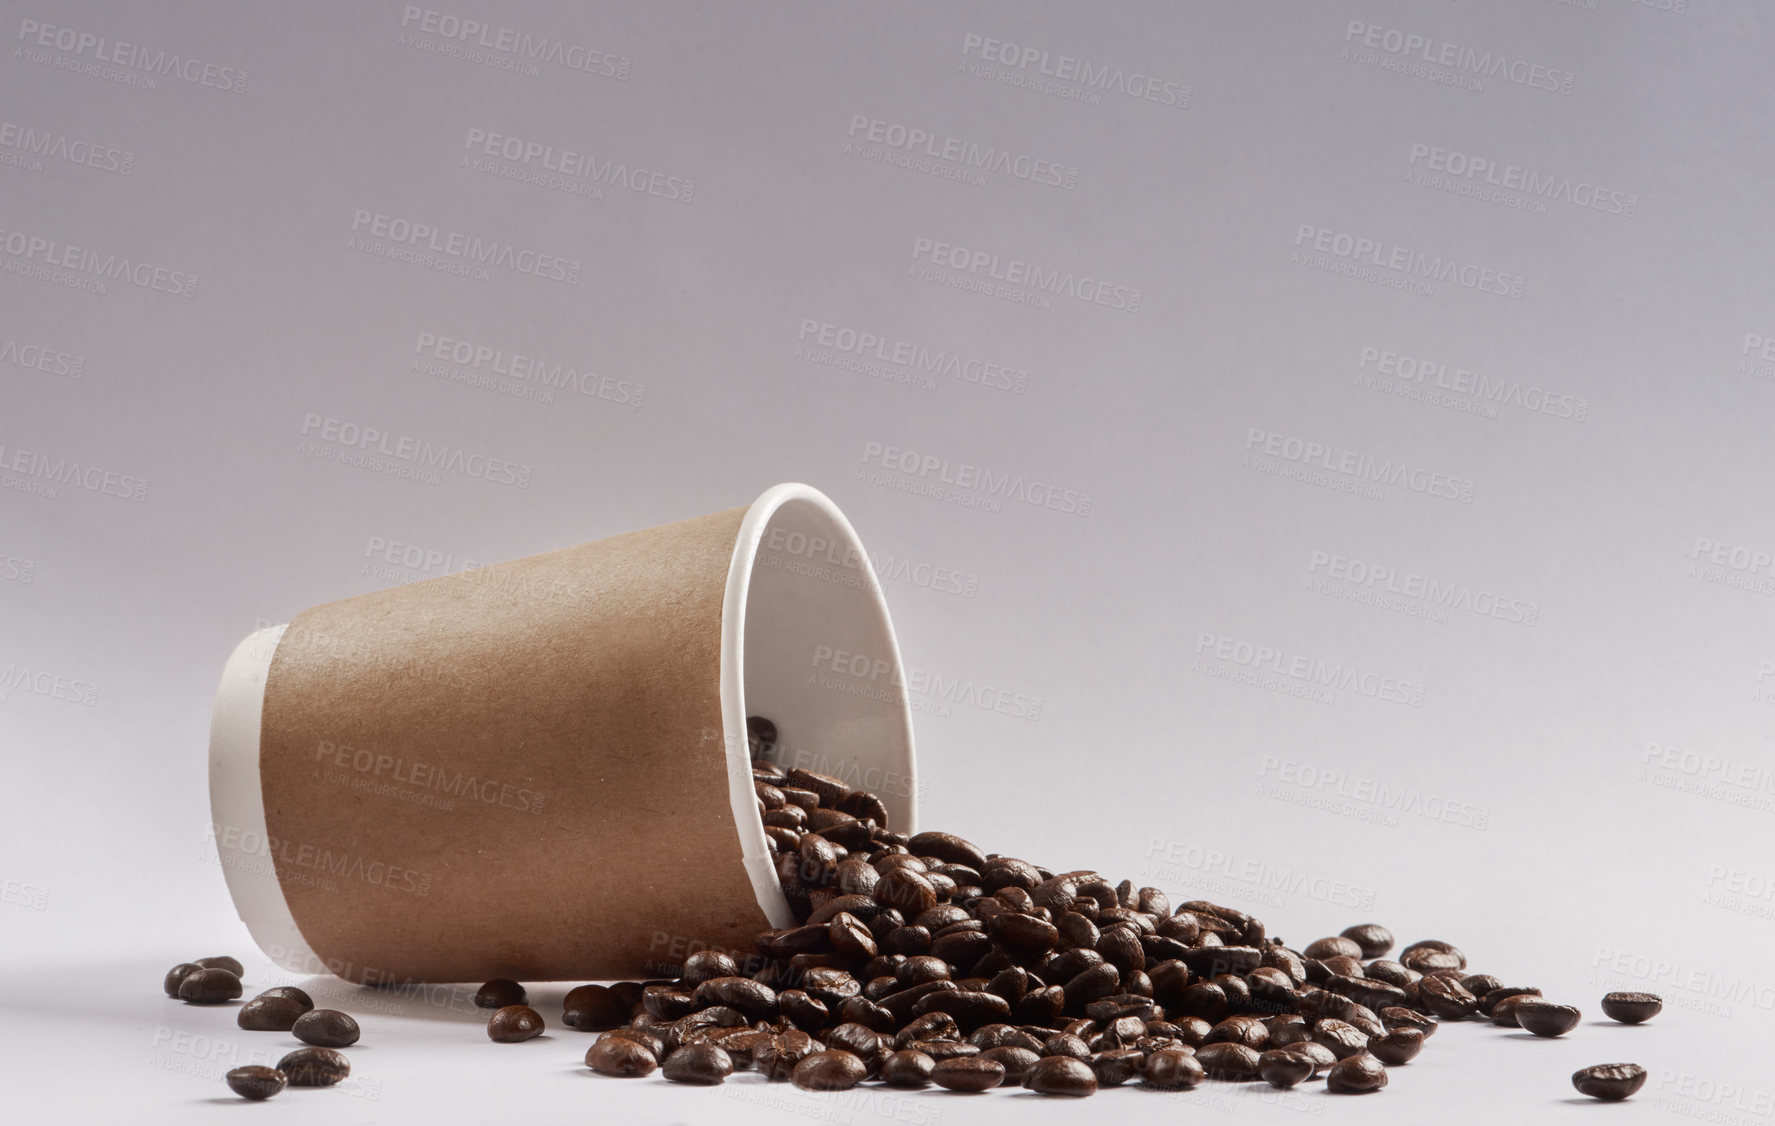 Buy stock photo Studio shot of a tipped over paper cup filled with coffee beans against a grey background